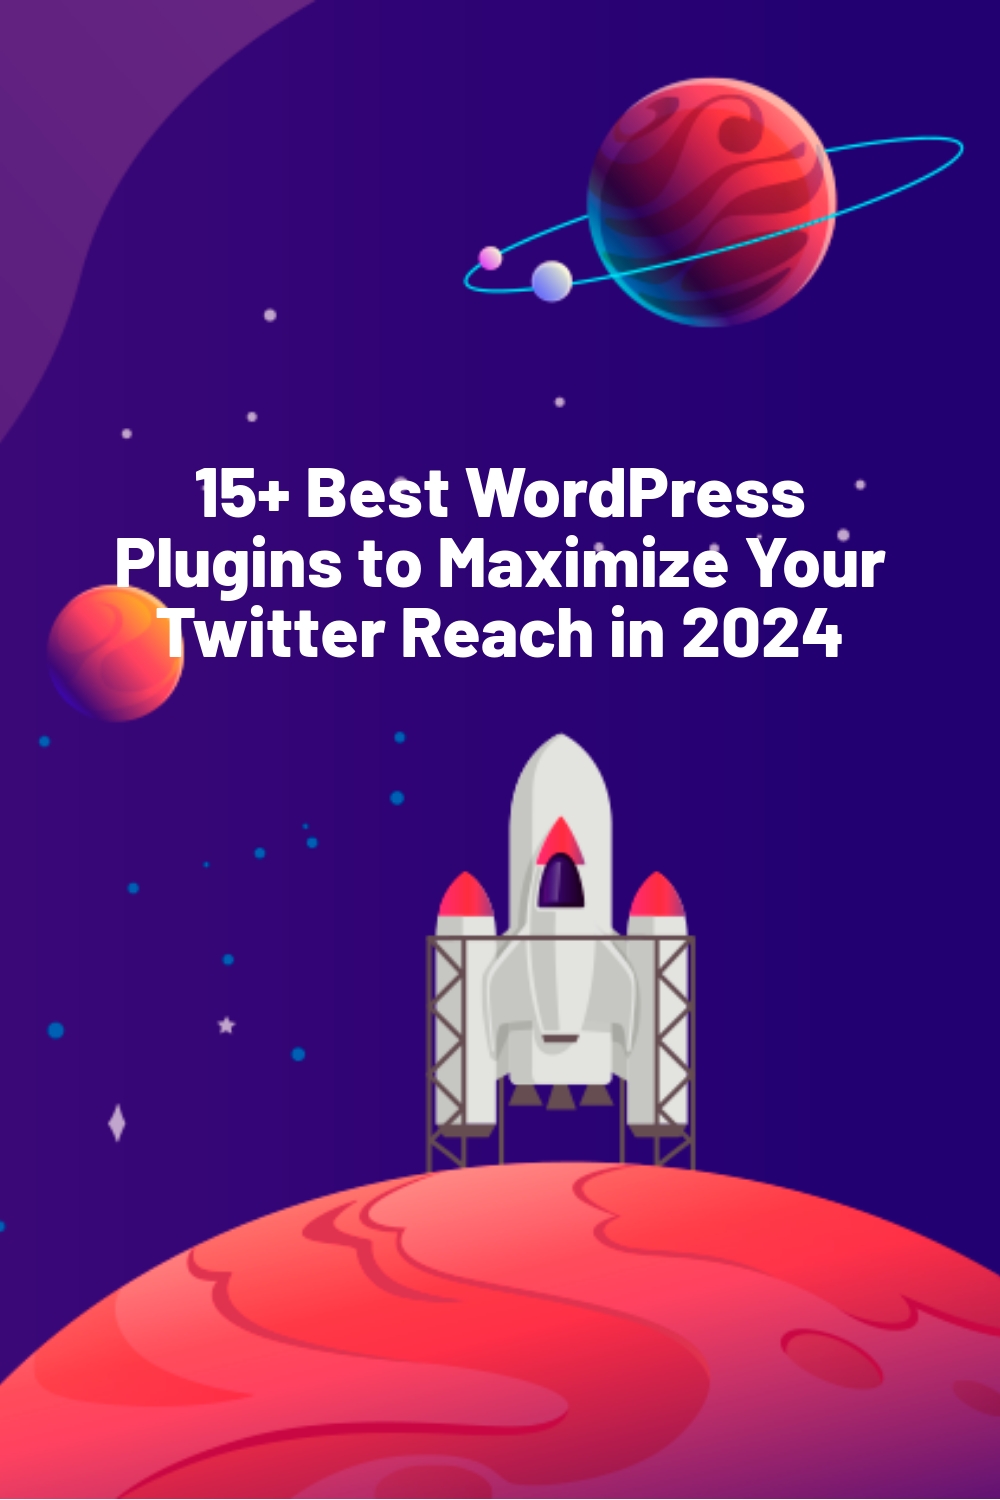 15+ Best WordPress Plugins to Maximize Your Twitter Reach in 2024